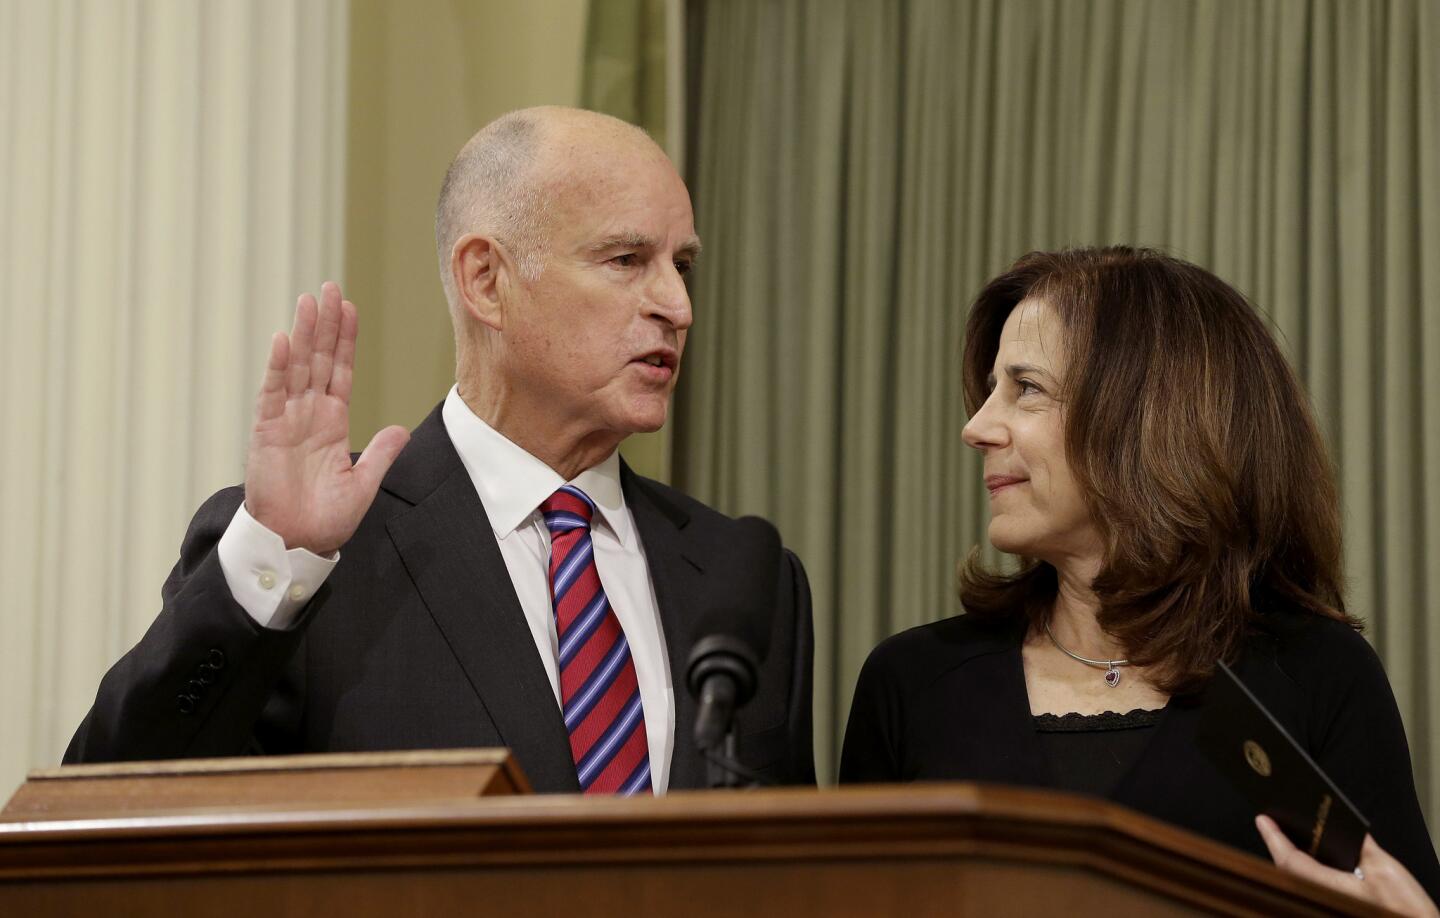 California Gov. Jerry Brown takes the oath of office for his fourth term as governor as his wife, Anne Gust Brown, looks in January 2015.